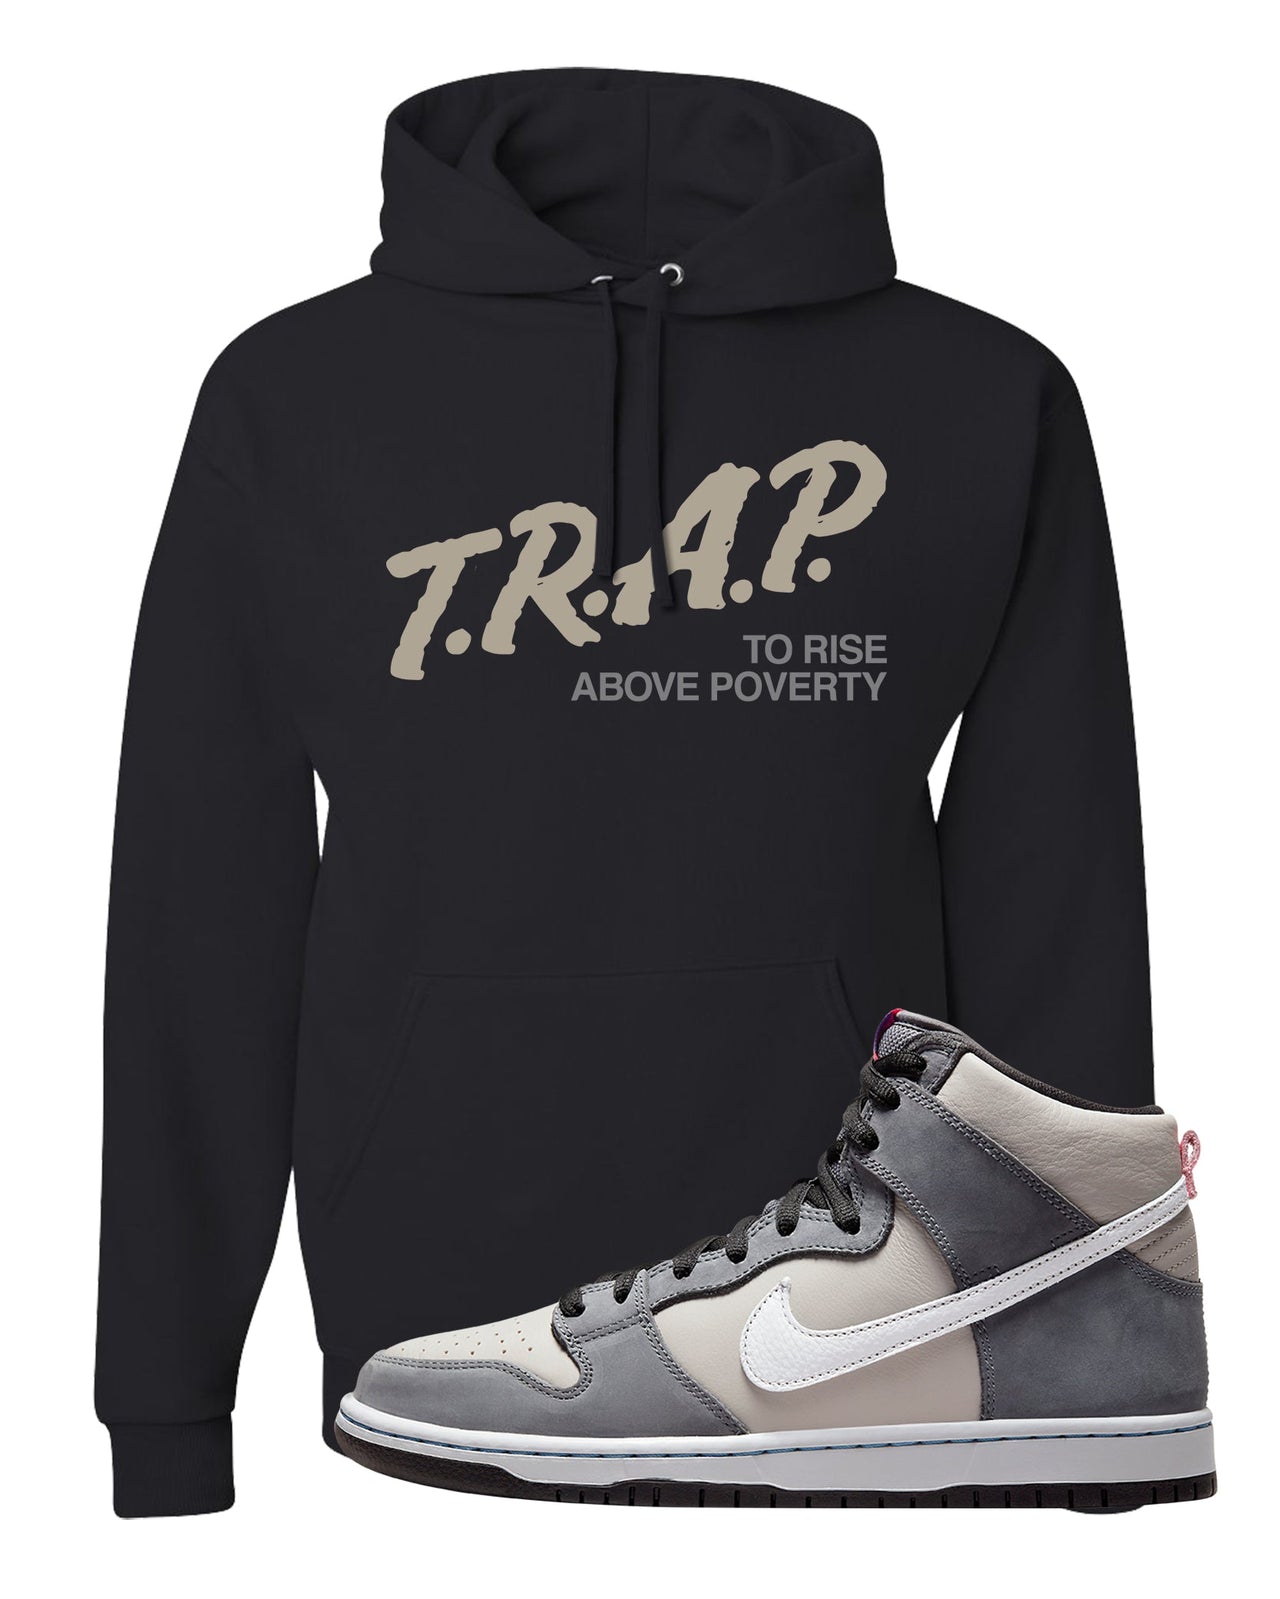 Medium Grey High Dunks Hoodie | Trap To Rise Above Poverty, Black